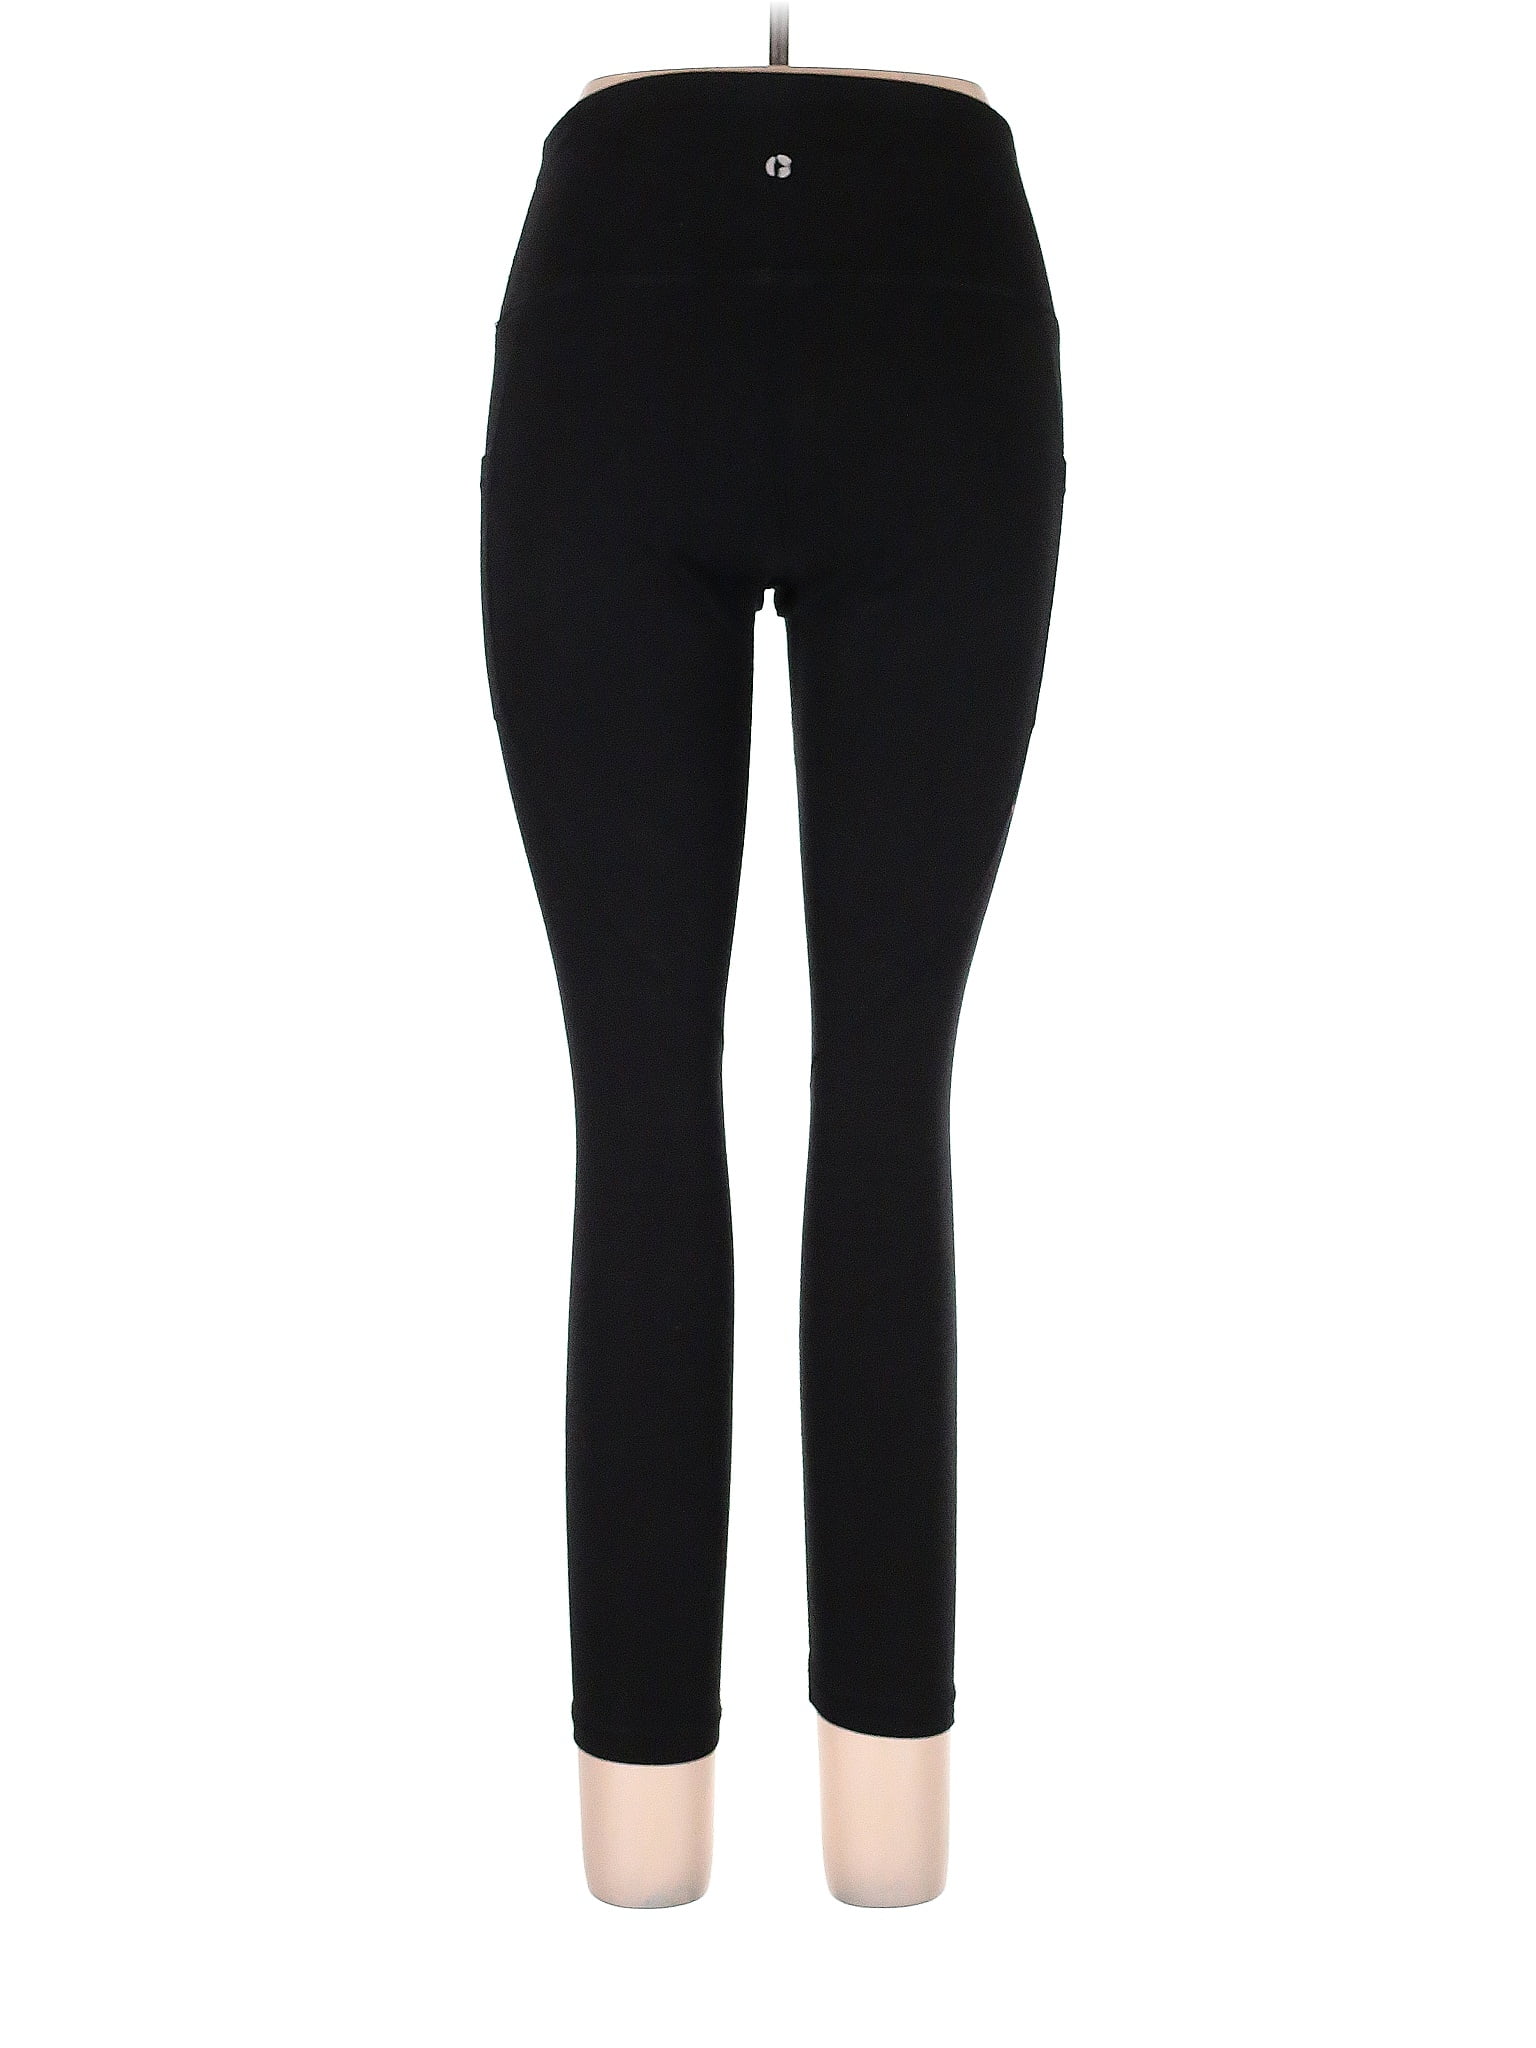 90 Degree by Reflex Solid Black Leggings Size L - 56% off